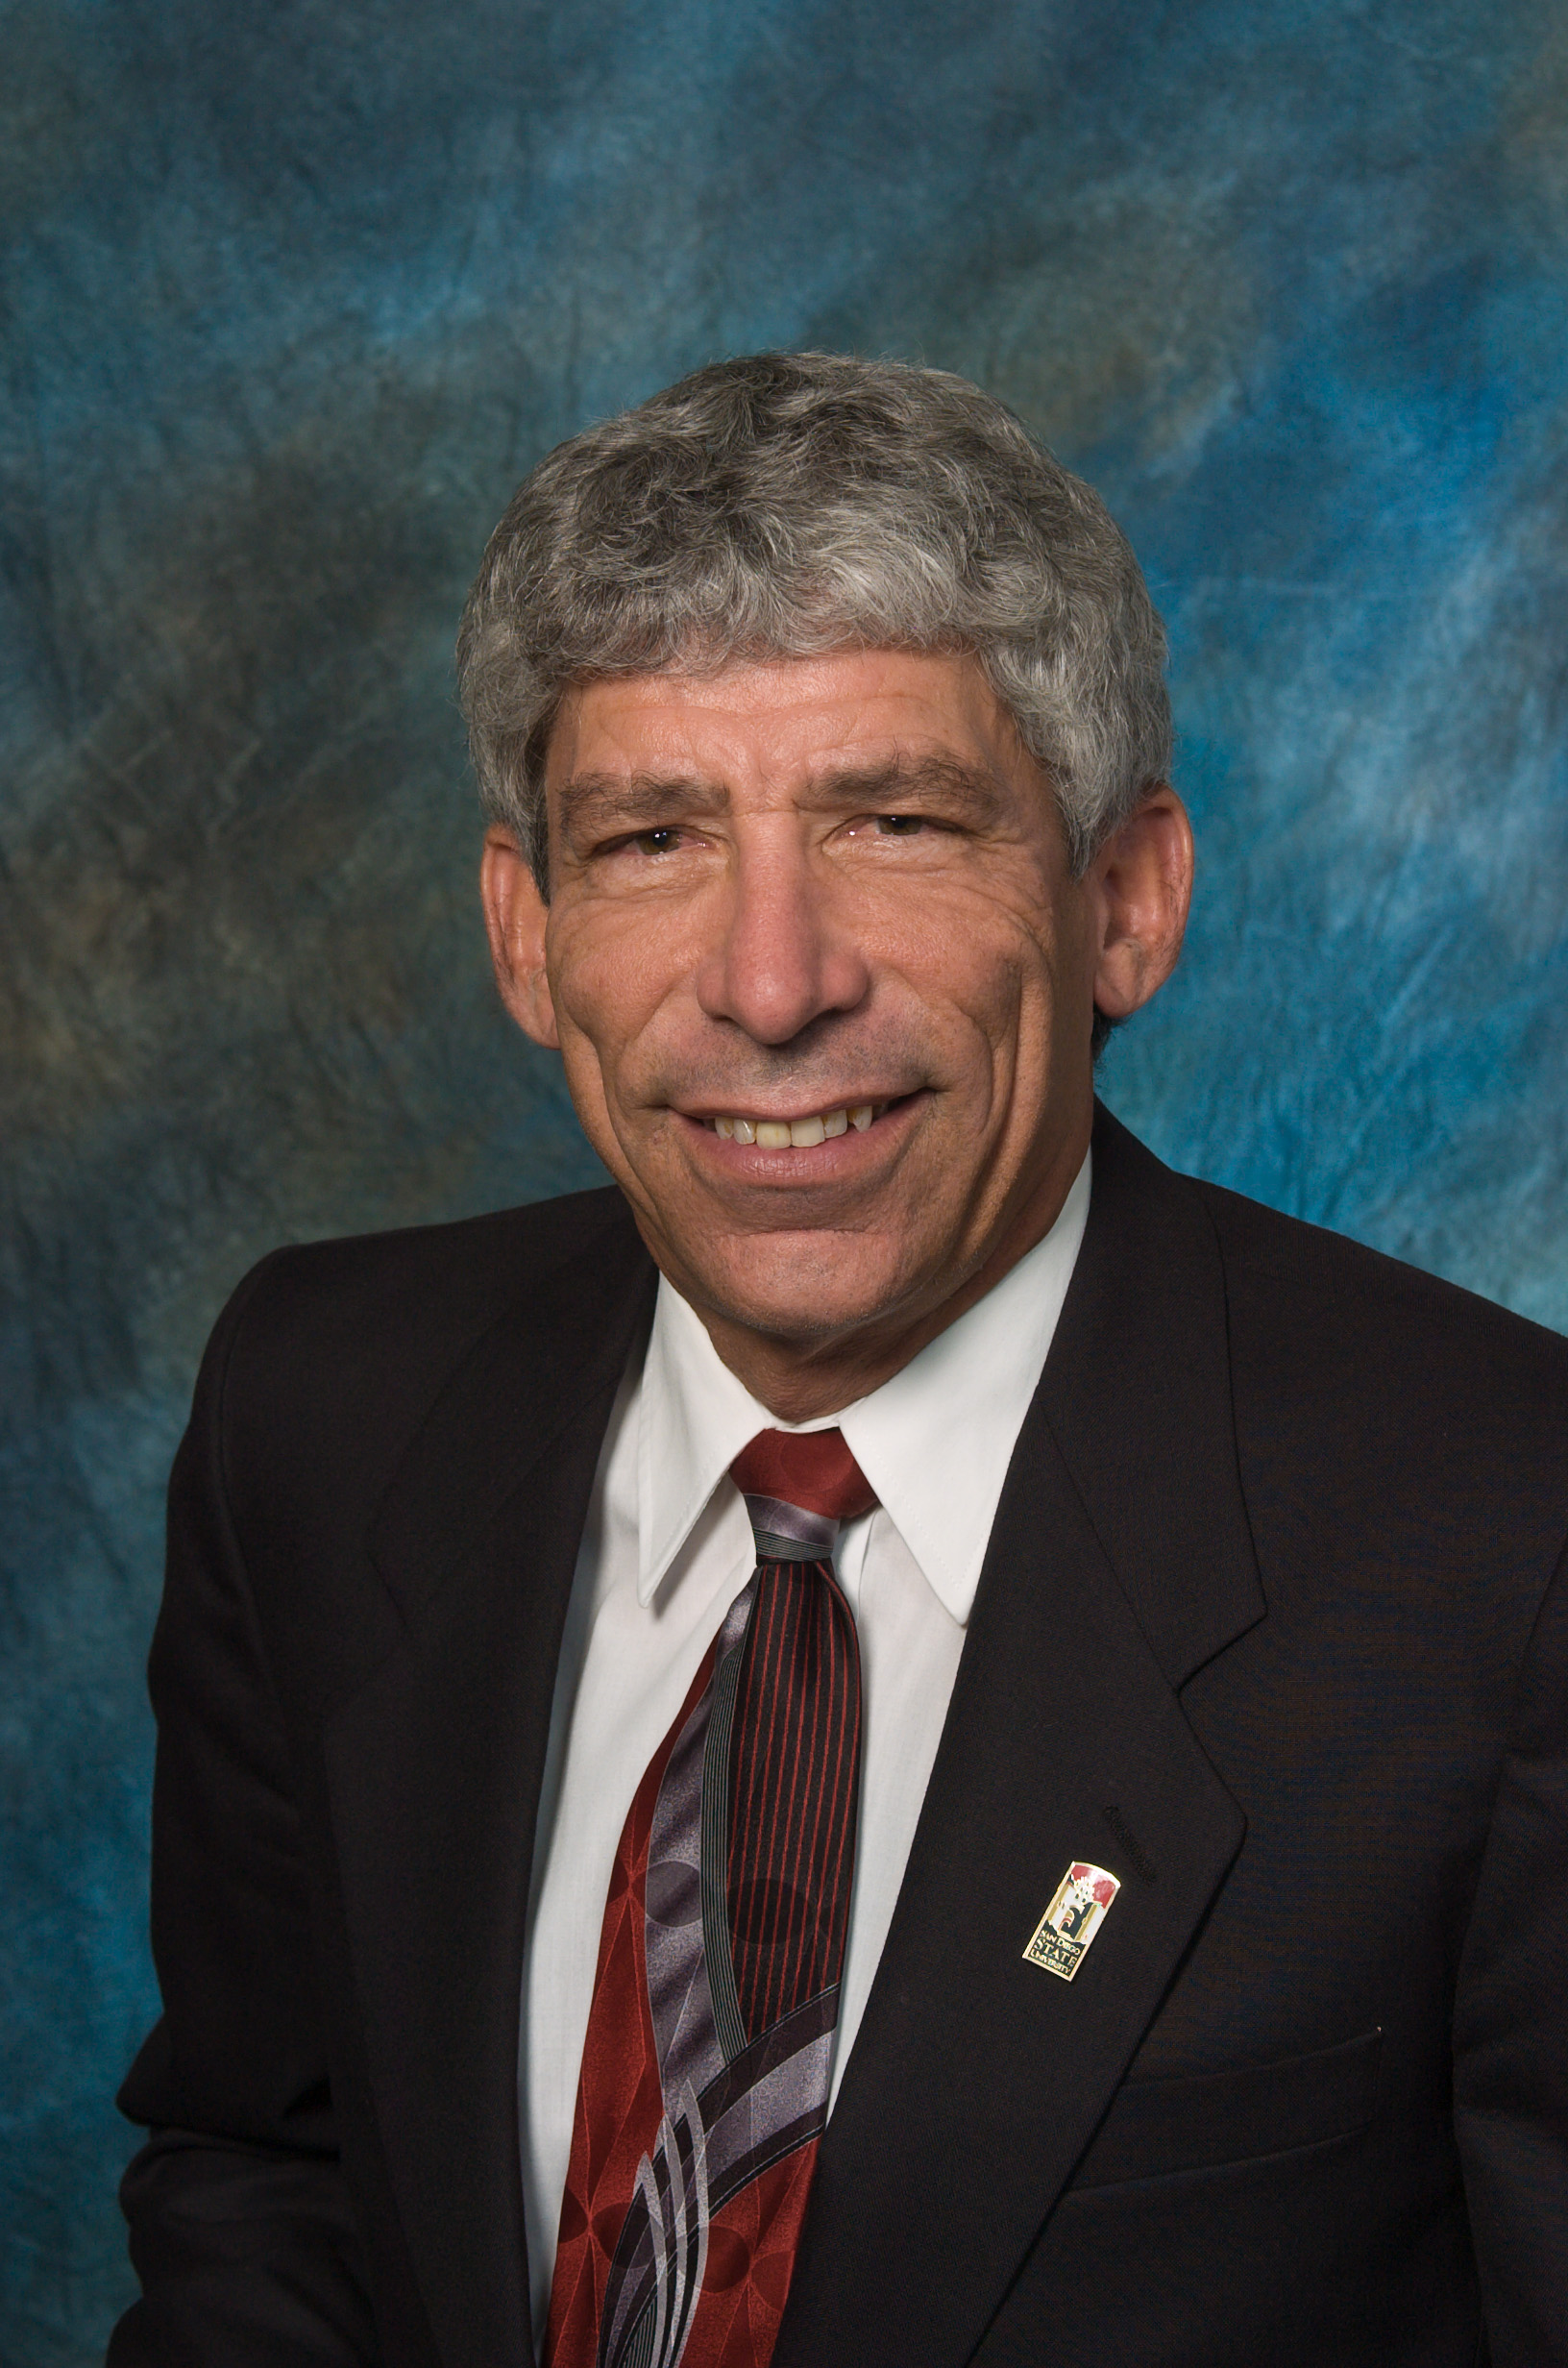 Jim Lackritz is the co-founder of the SDSU Sports MBA program.